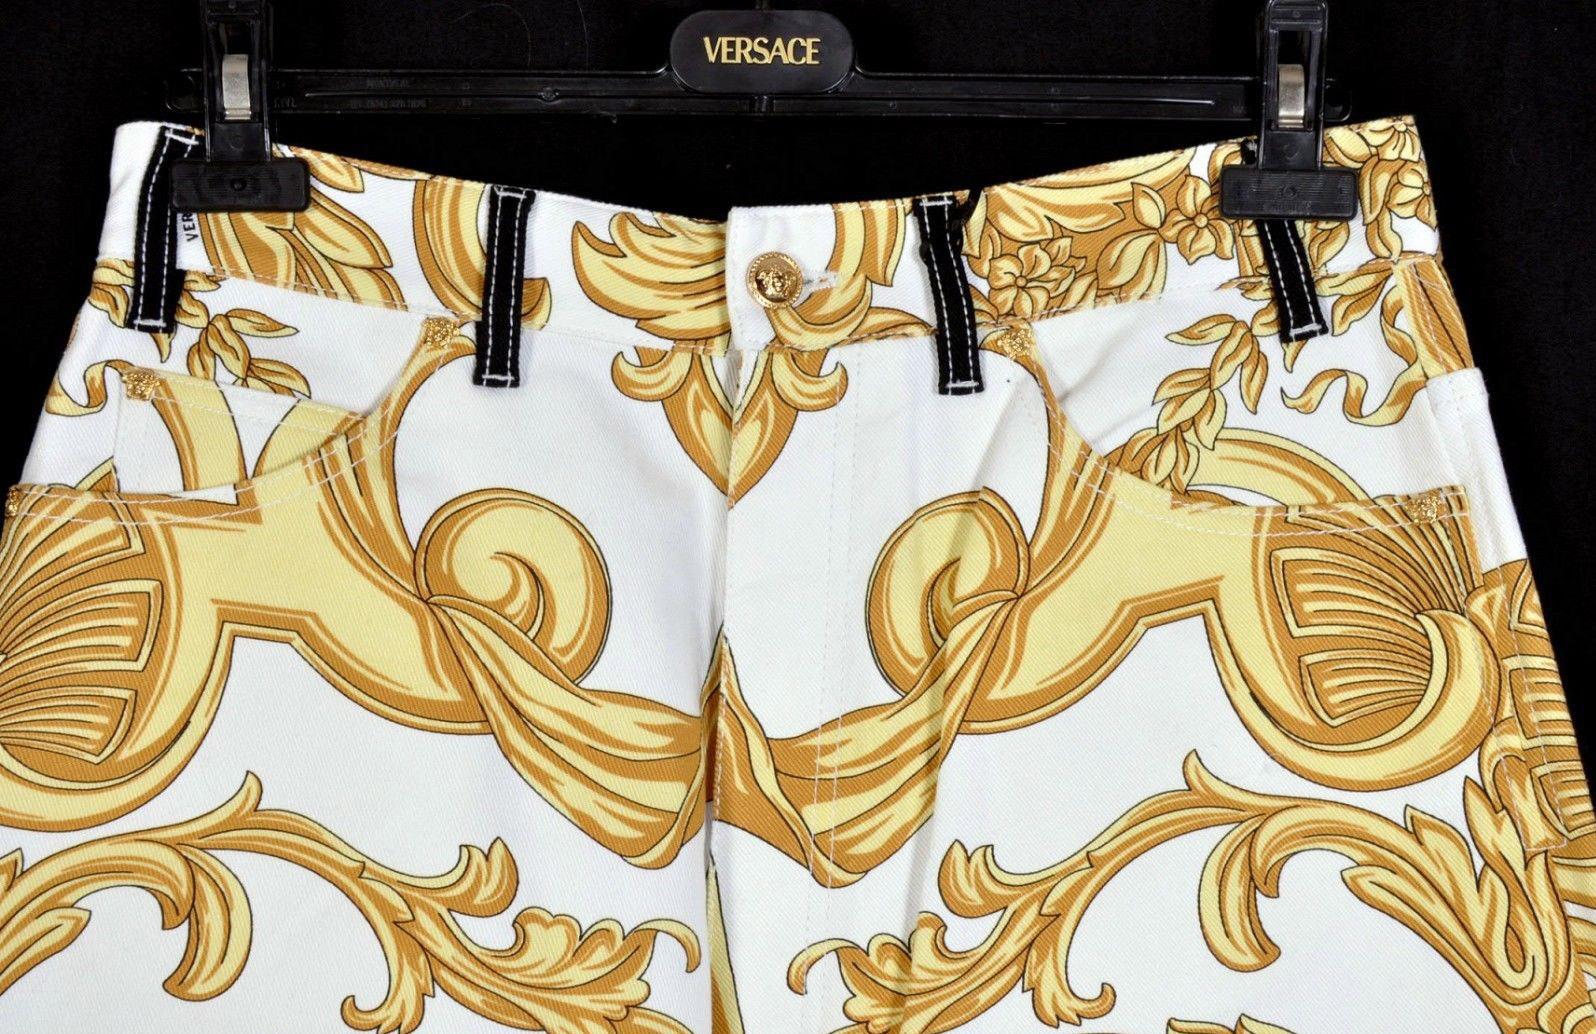 VERSACE  
BAROCCO PRINTED JEANS


97% Cotton, 3% Elastane

Finished with gold Medusa rivets.
Size 32

Waist 32